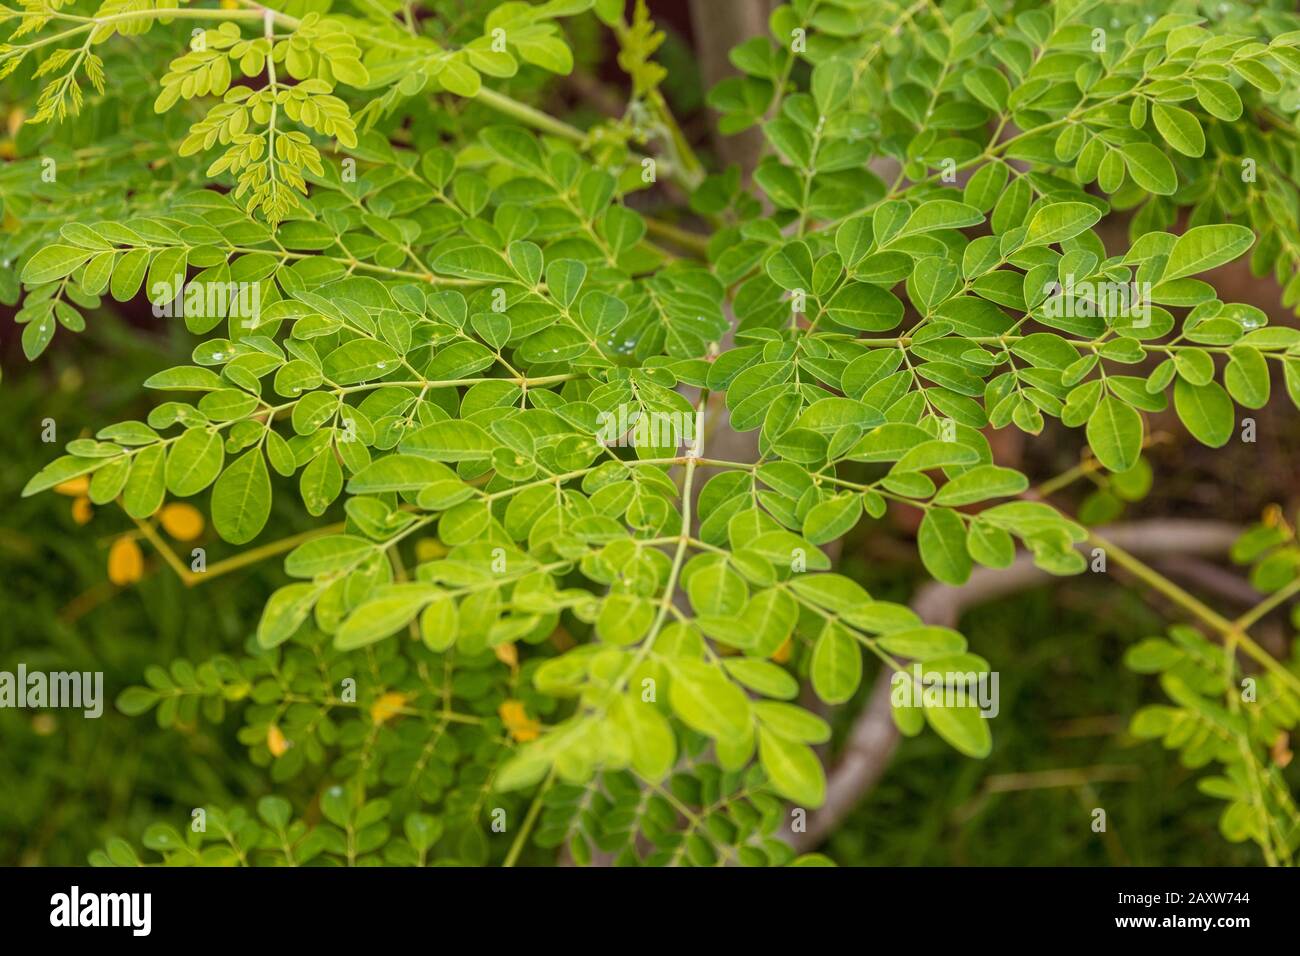 Perfect close-up view of moringa leaves (Moringa oleifera) organically grown in Malaysia. The leaves are the most nutritious part of the plant, being... Stock Photo